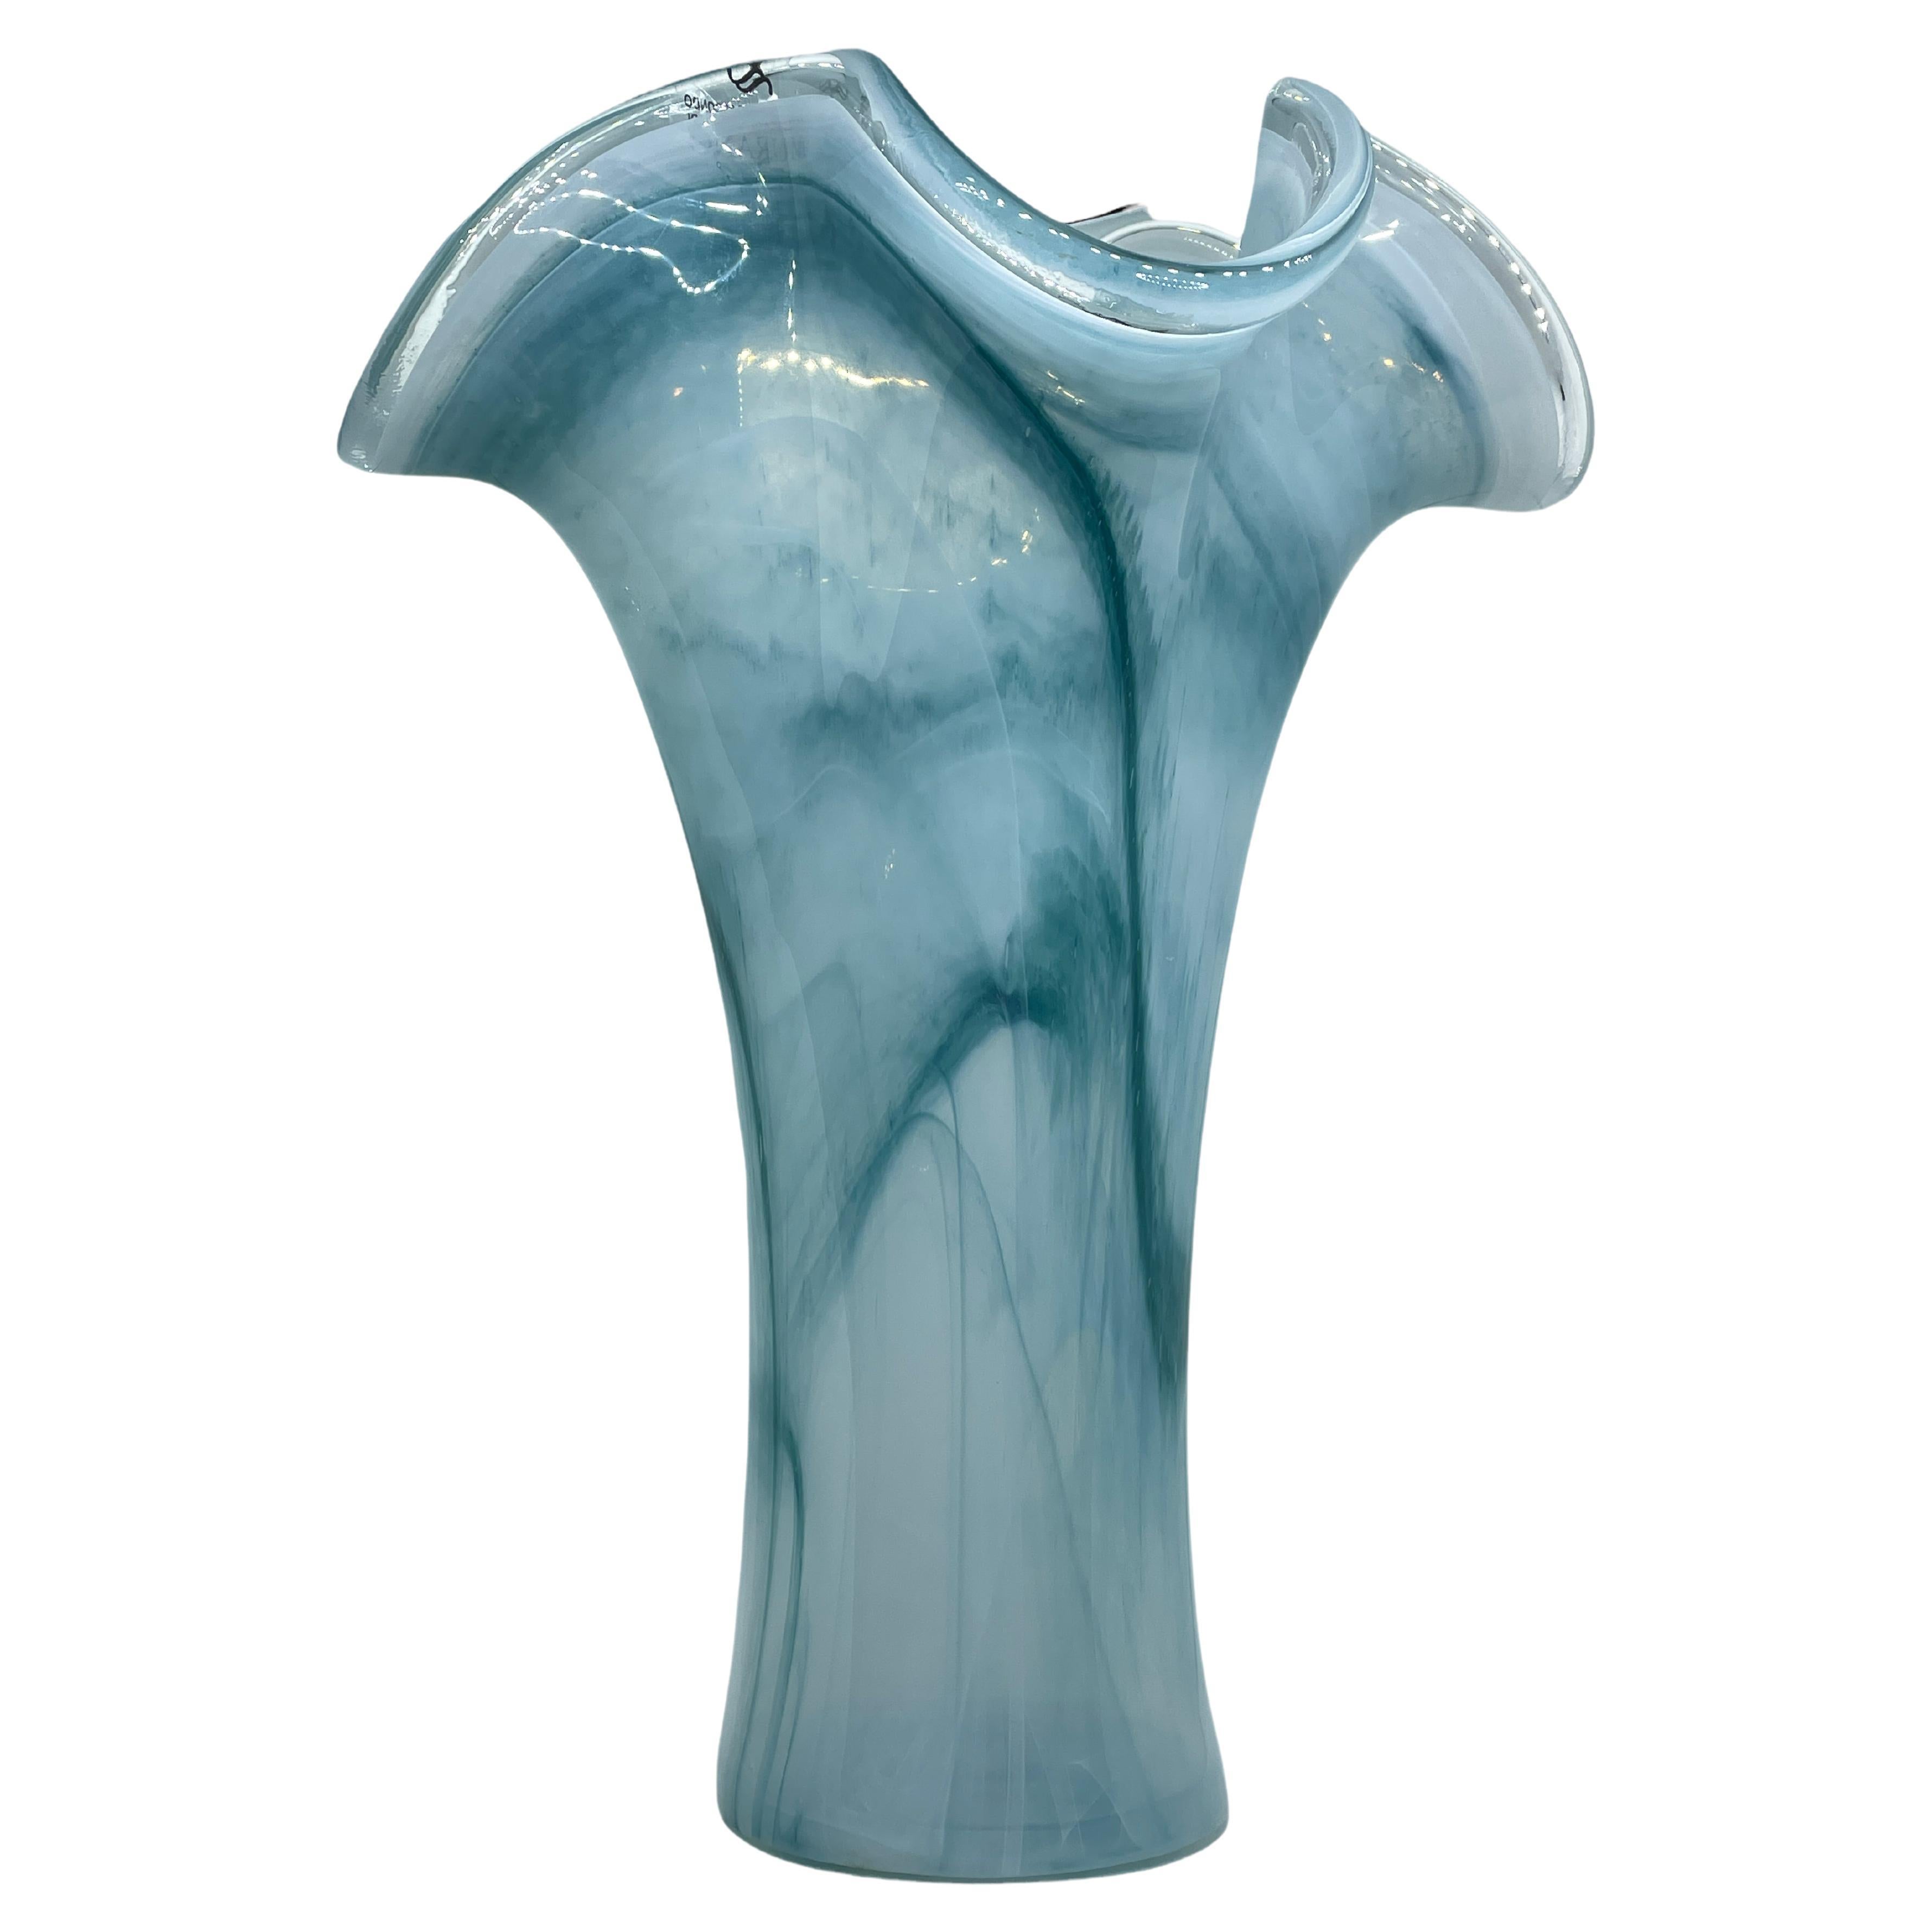 Vintage Murano Glass Vase in Celadon & Turquoise with Fazzoletto Design, 1980s